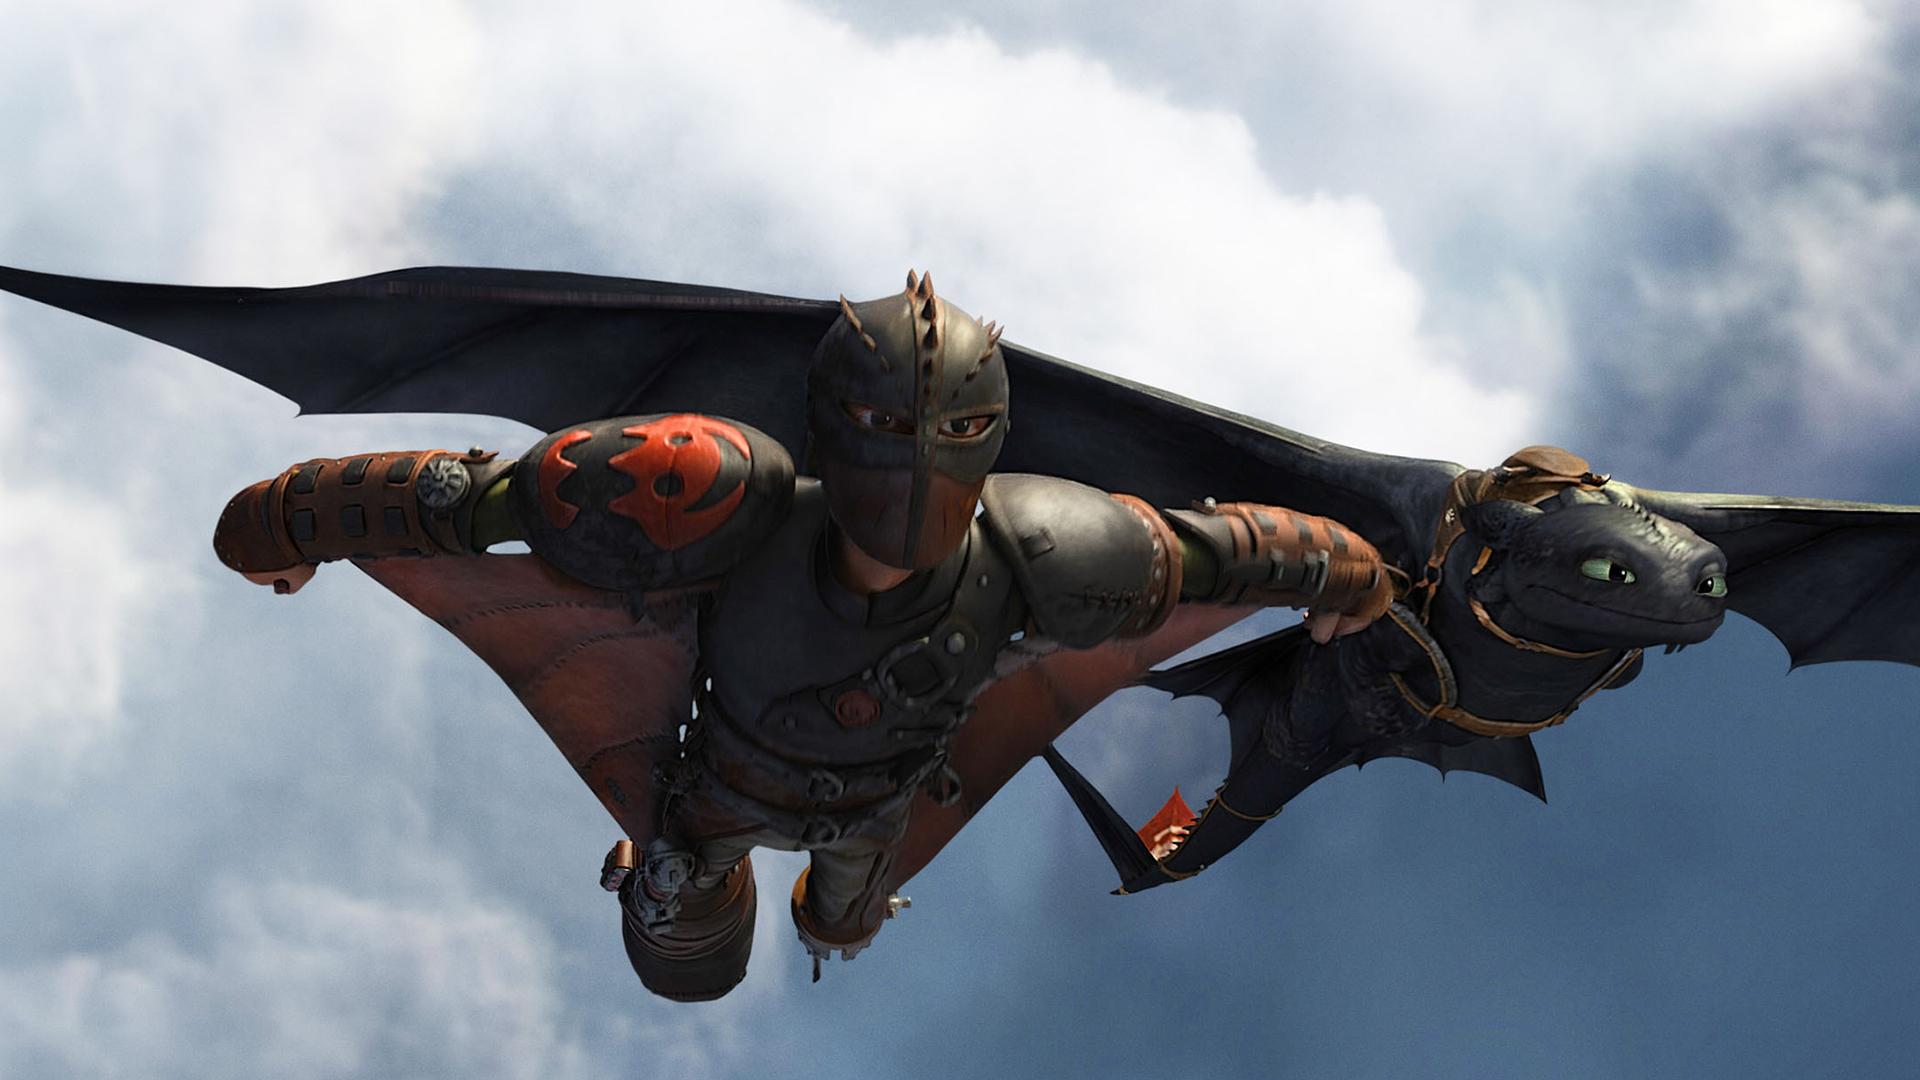 How to Train Your Dragon 3' Pushed to 2017